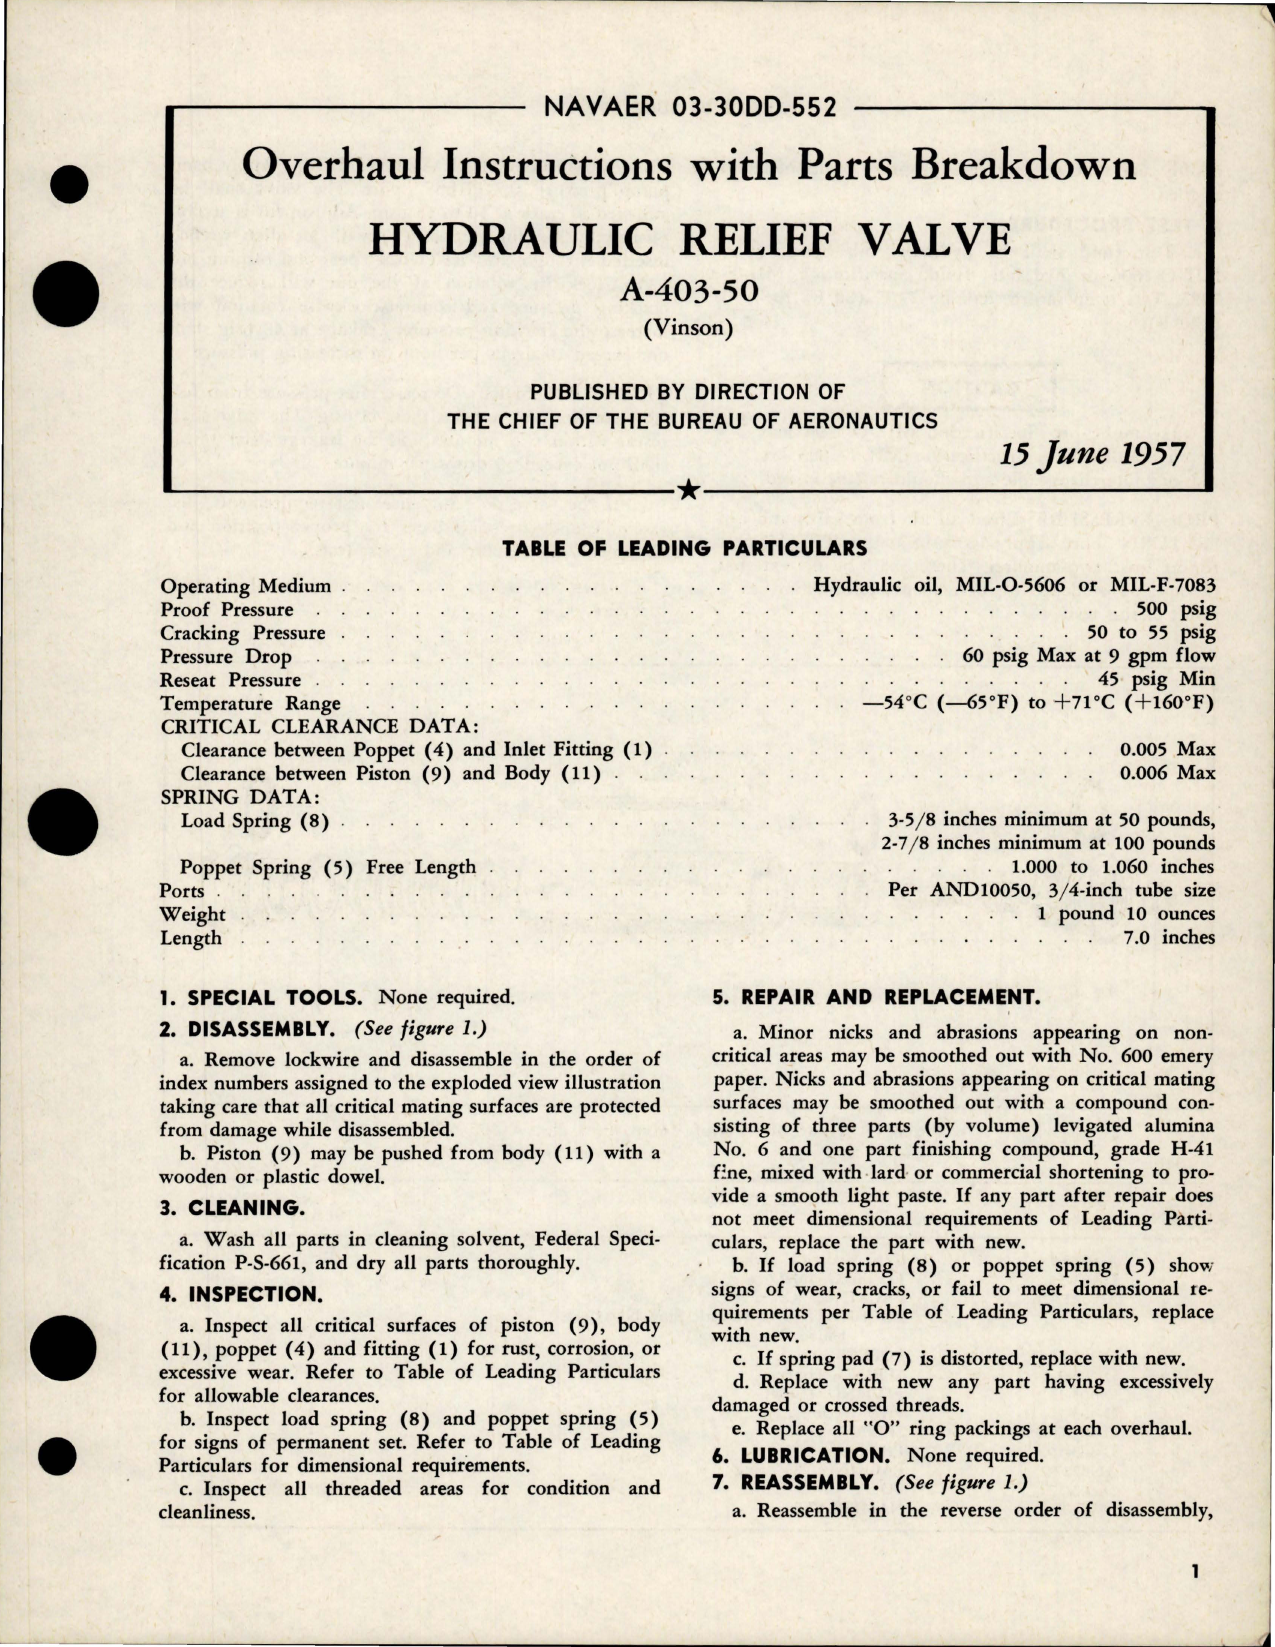 Sample page 1 from AirCorps Library document: Overhaul Instructions with Parts Breakdown for Hydraulic Relief Valve - A-403-50